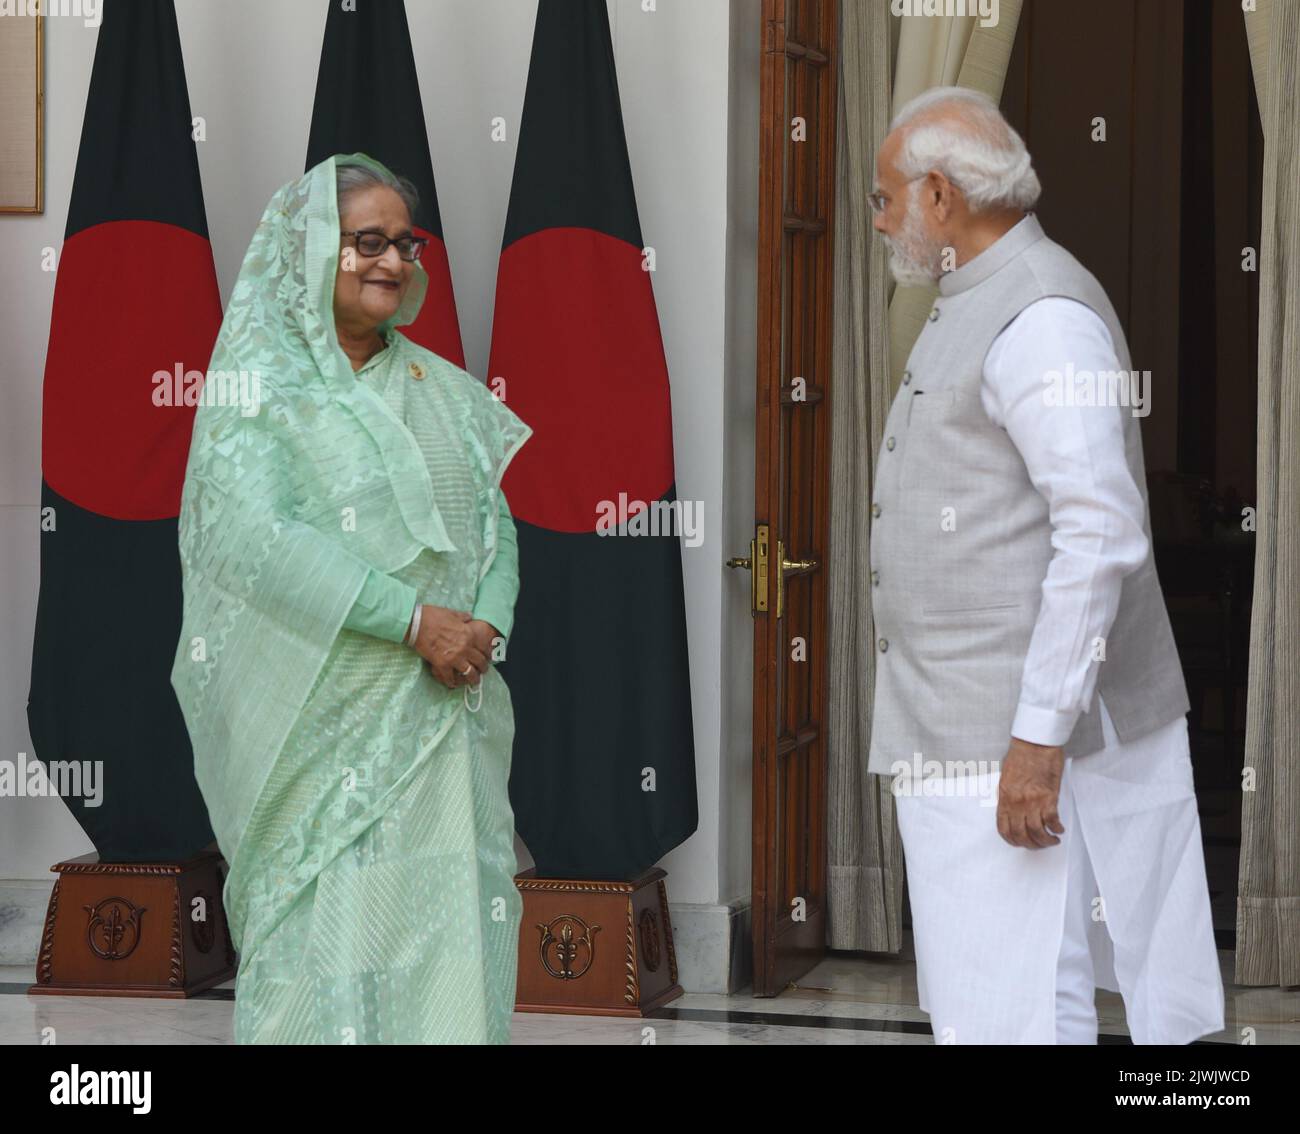 New Delhi, India. 06th Sep, 2022. Prime Minister Narendra Modi with Bangladesh counterpart Sheikh Hasina on their way for bilateral talks at Hyderabad House. Prime Minister Hasina is on a four day visit to India and likely sign pacts on water sharing, defence and mutual co-operation. (Photo by Sondeep Shankar/Pacific Press) Credit: Pacific Press Media Production Corp./Alamy Live News Stock Photo